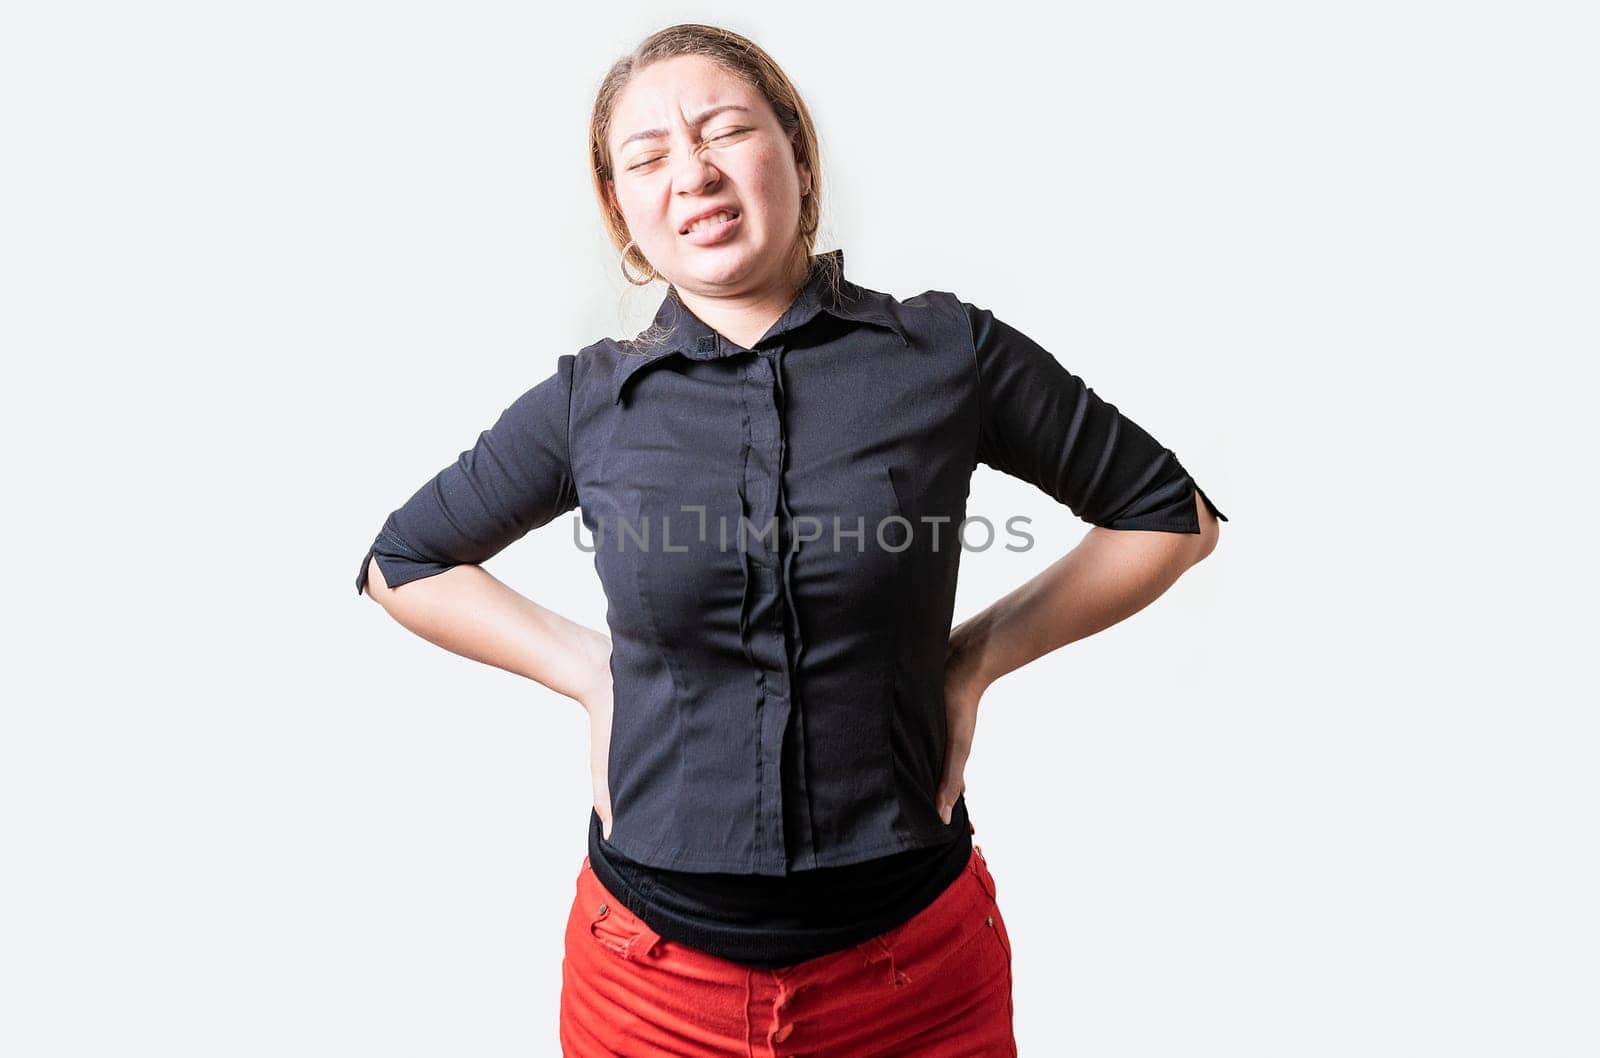 Suffering girl with back pain. Young woman with back pain. Lumbar problems concept. People with spine problems isolated by isaiphoto